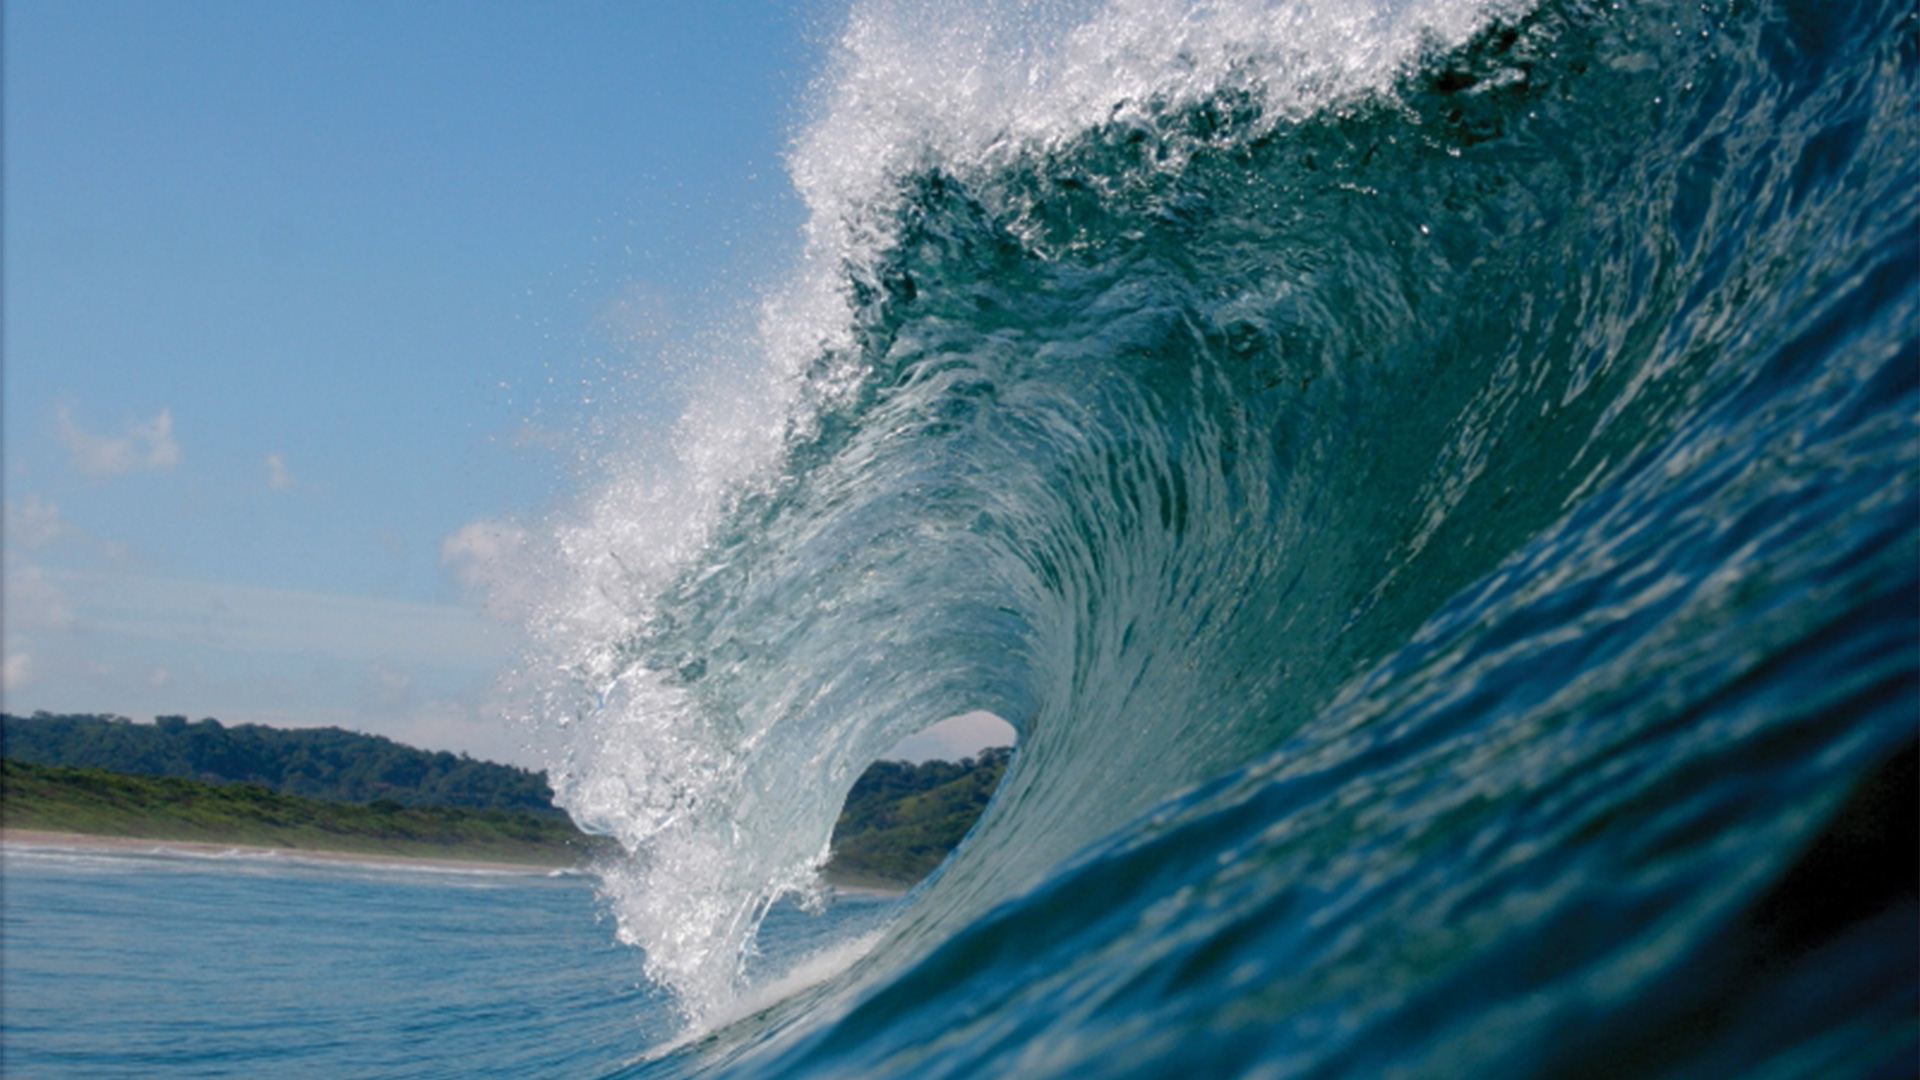 Sideview of a wave cresting at Playa Grande in Costa Rica